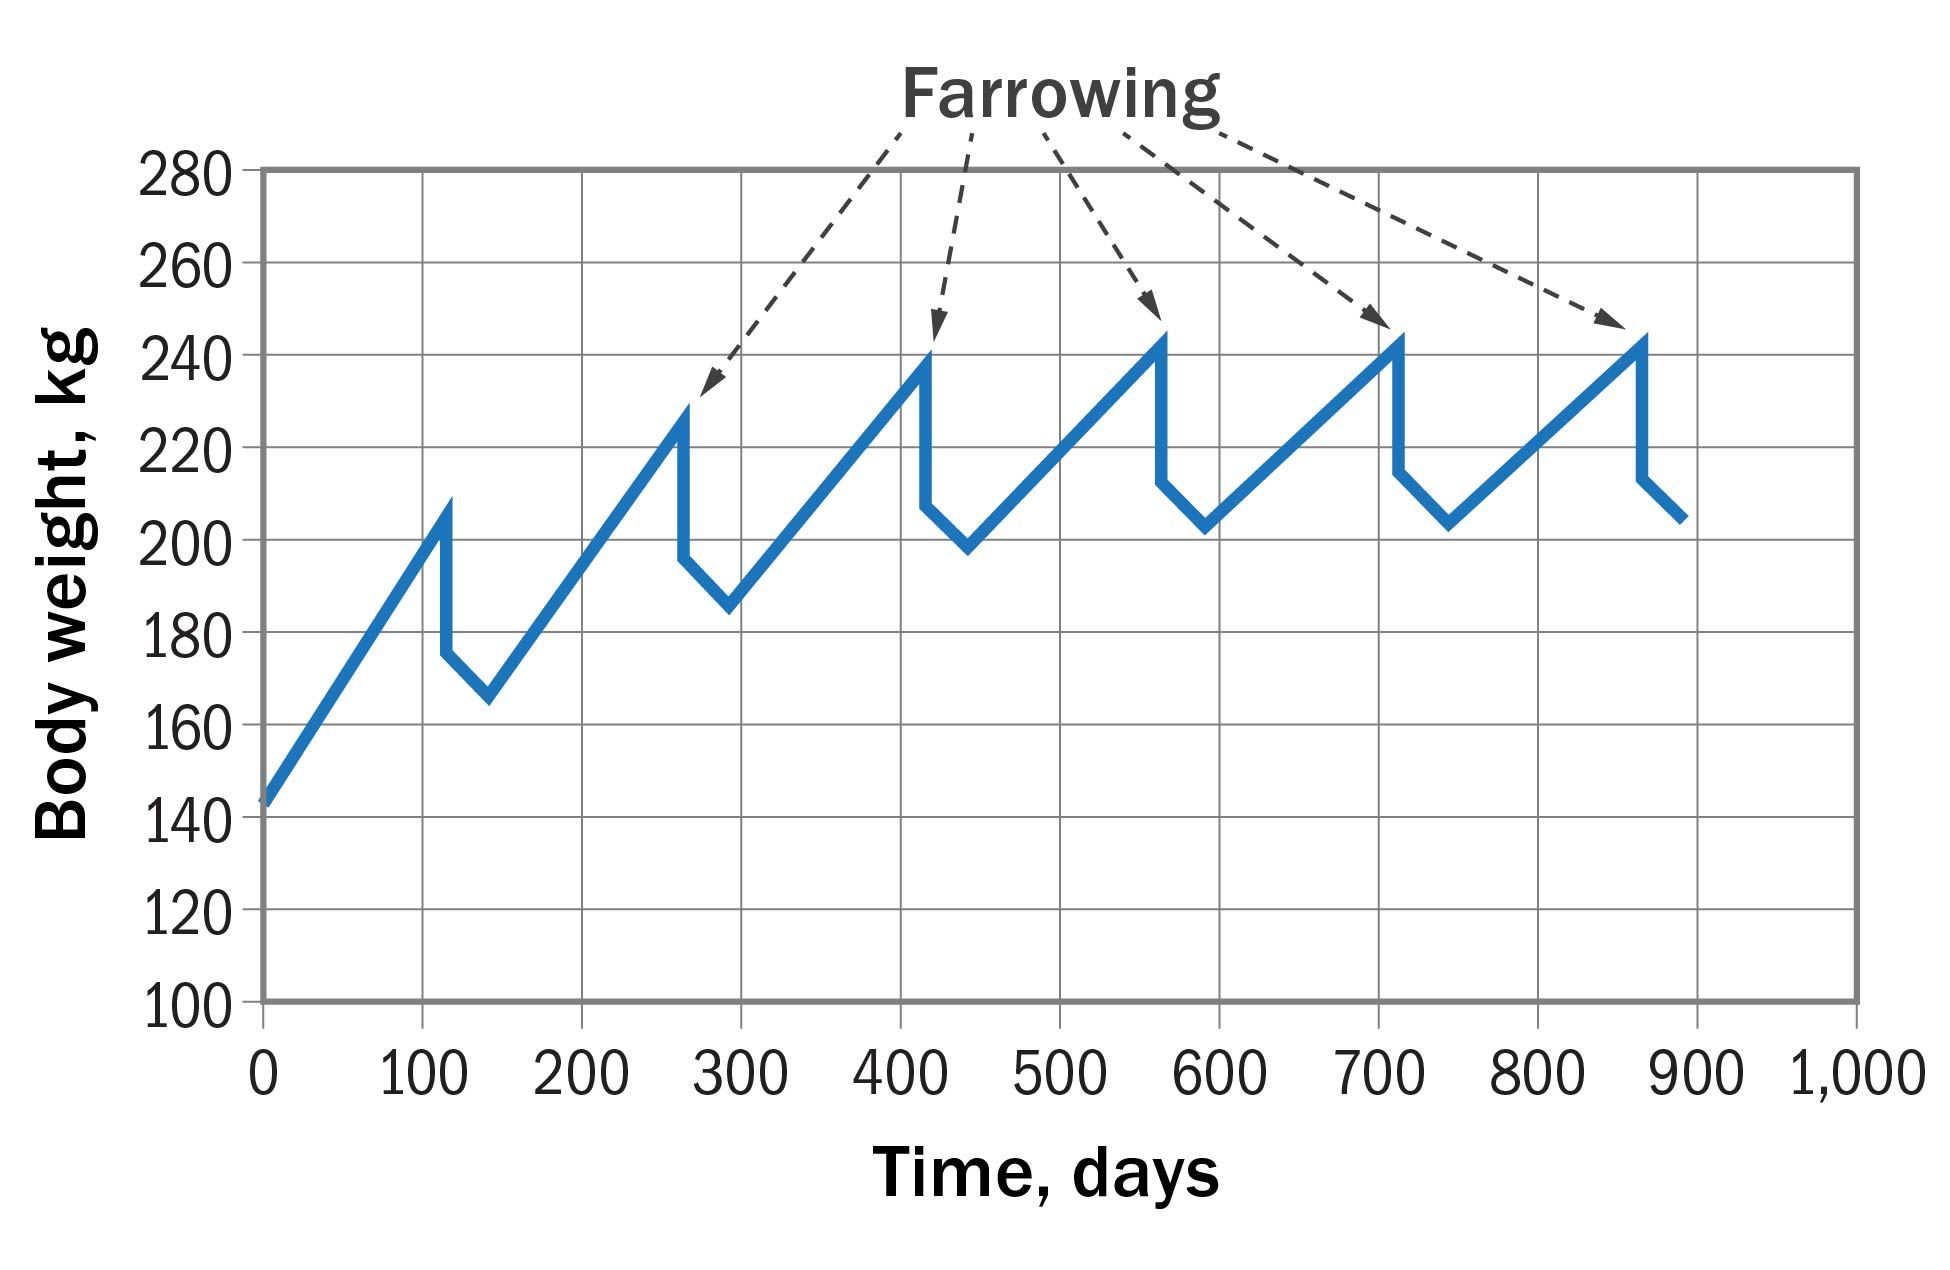 Graph showing body weight in kg on left hand side beginning at 100 at the bottom, increasing by 20 kg increments to 280 at the top. Time in days is listed across the bottom starting at 0 on the left and going to 1000 on the right increases in 100-day increments. The word farrowing is written across the top with five arrows pointing to peaks in the line that starts at 140 kg on the left and gradually increases with peaks and valleys.